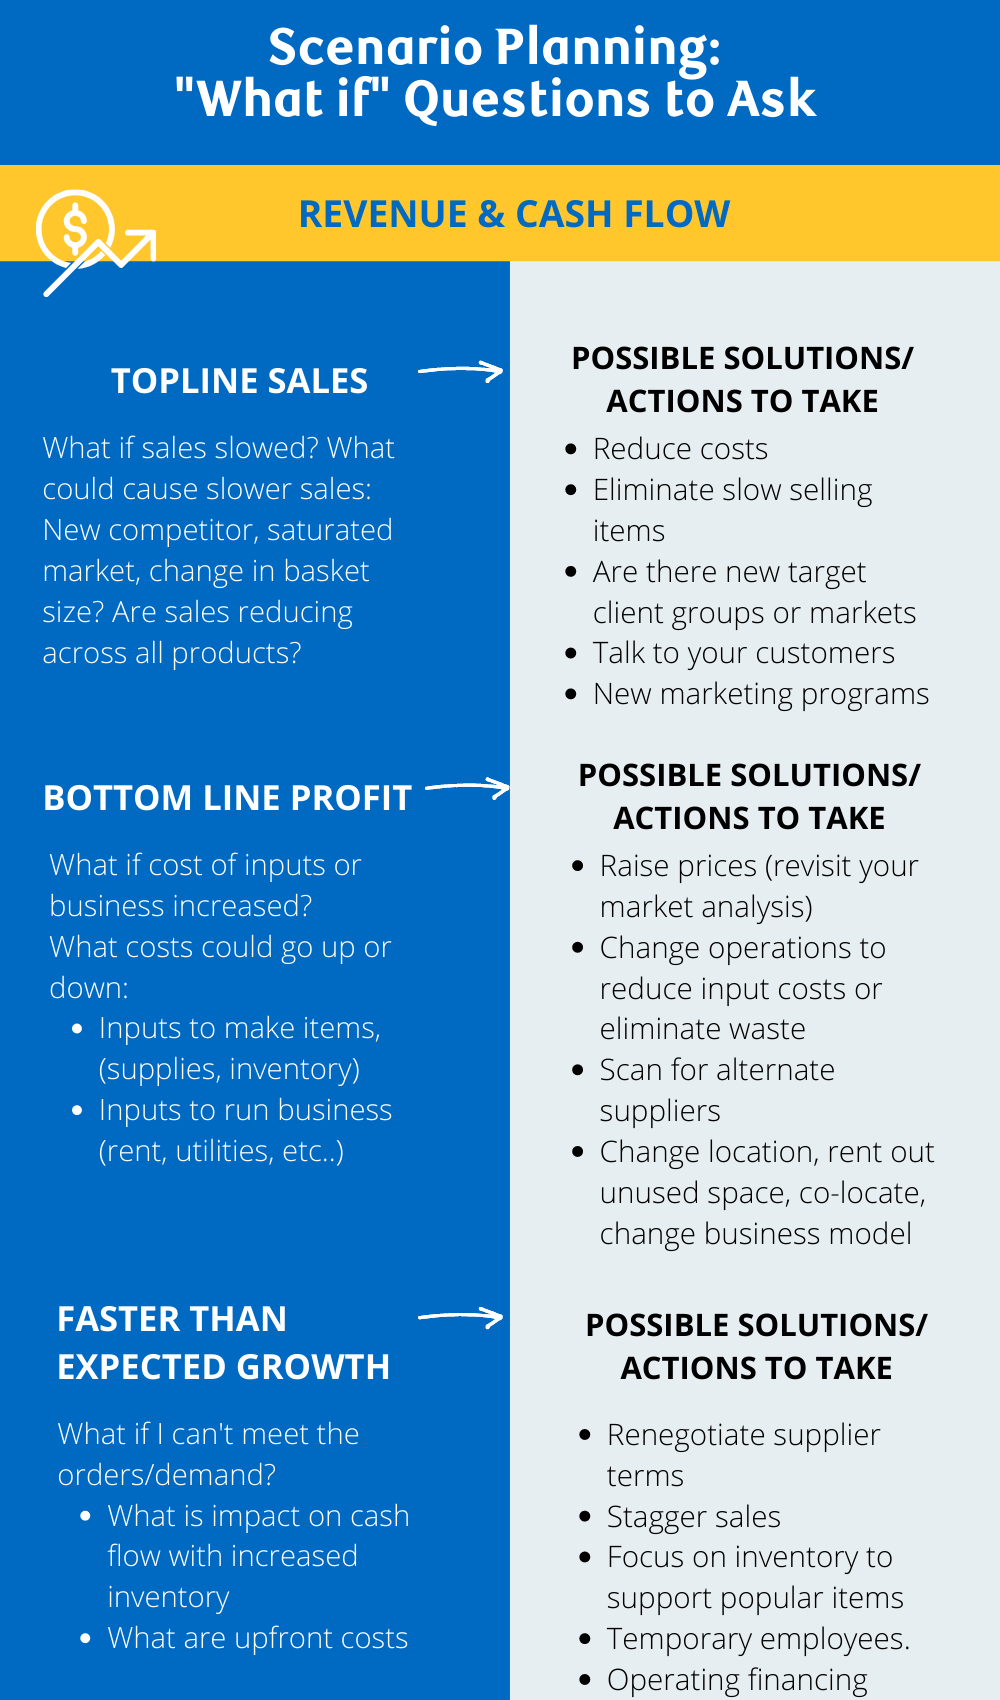 RBC Small Business Talks infographic